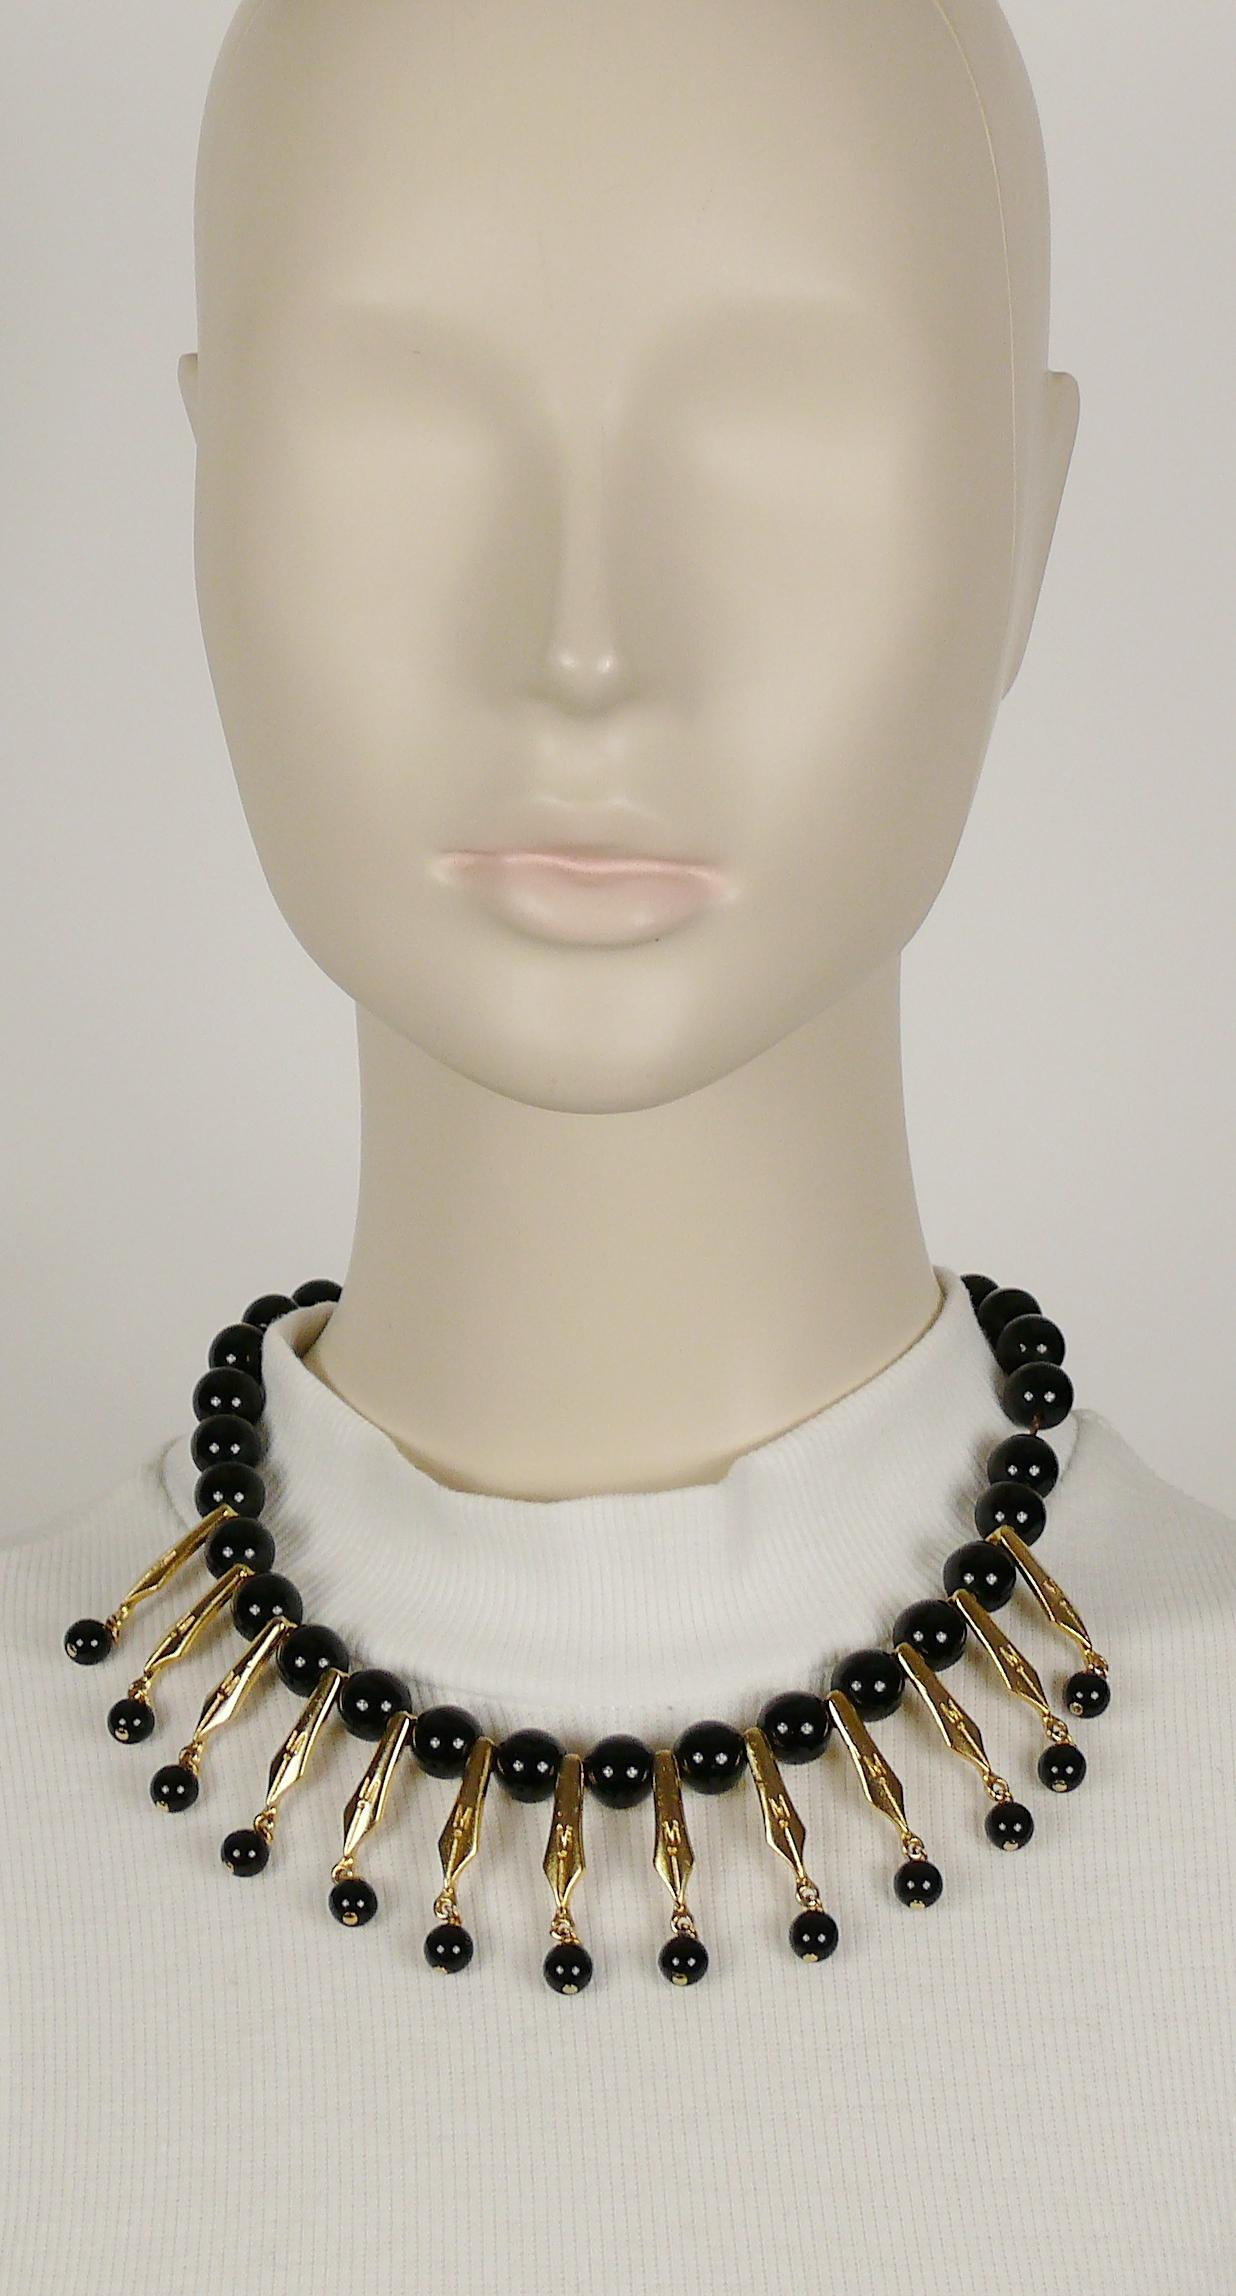 MOSCHINO vintage black resin bead necklace featuring gold toned pen nibs embossed with M initial.

Spring clasp and toggle closure.

Embossed MOSCHINO.

Indicative measurement : length approx. 44 cm (17.32 inches) / drop approx. 3.5 cm (1.38